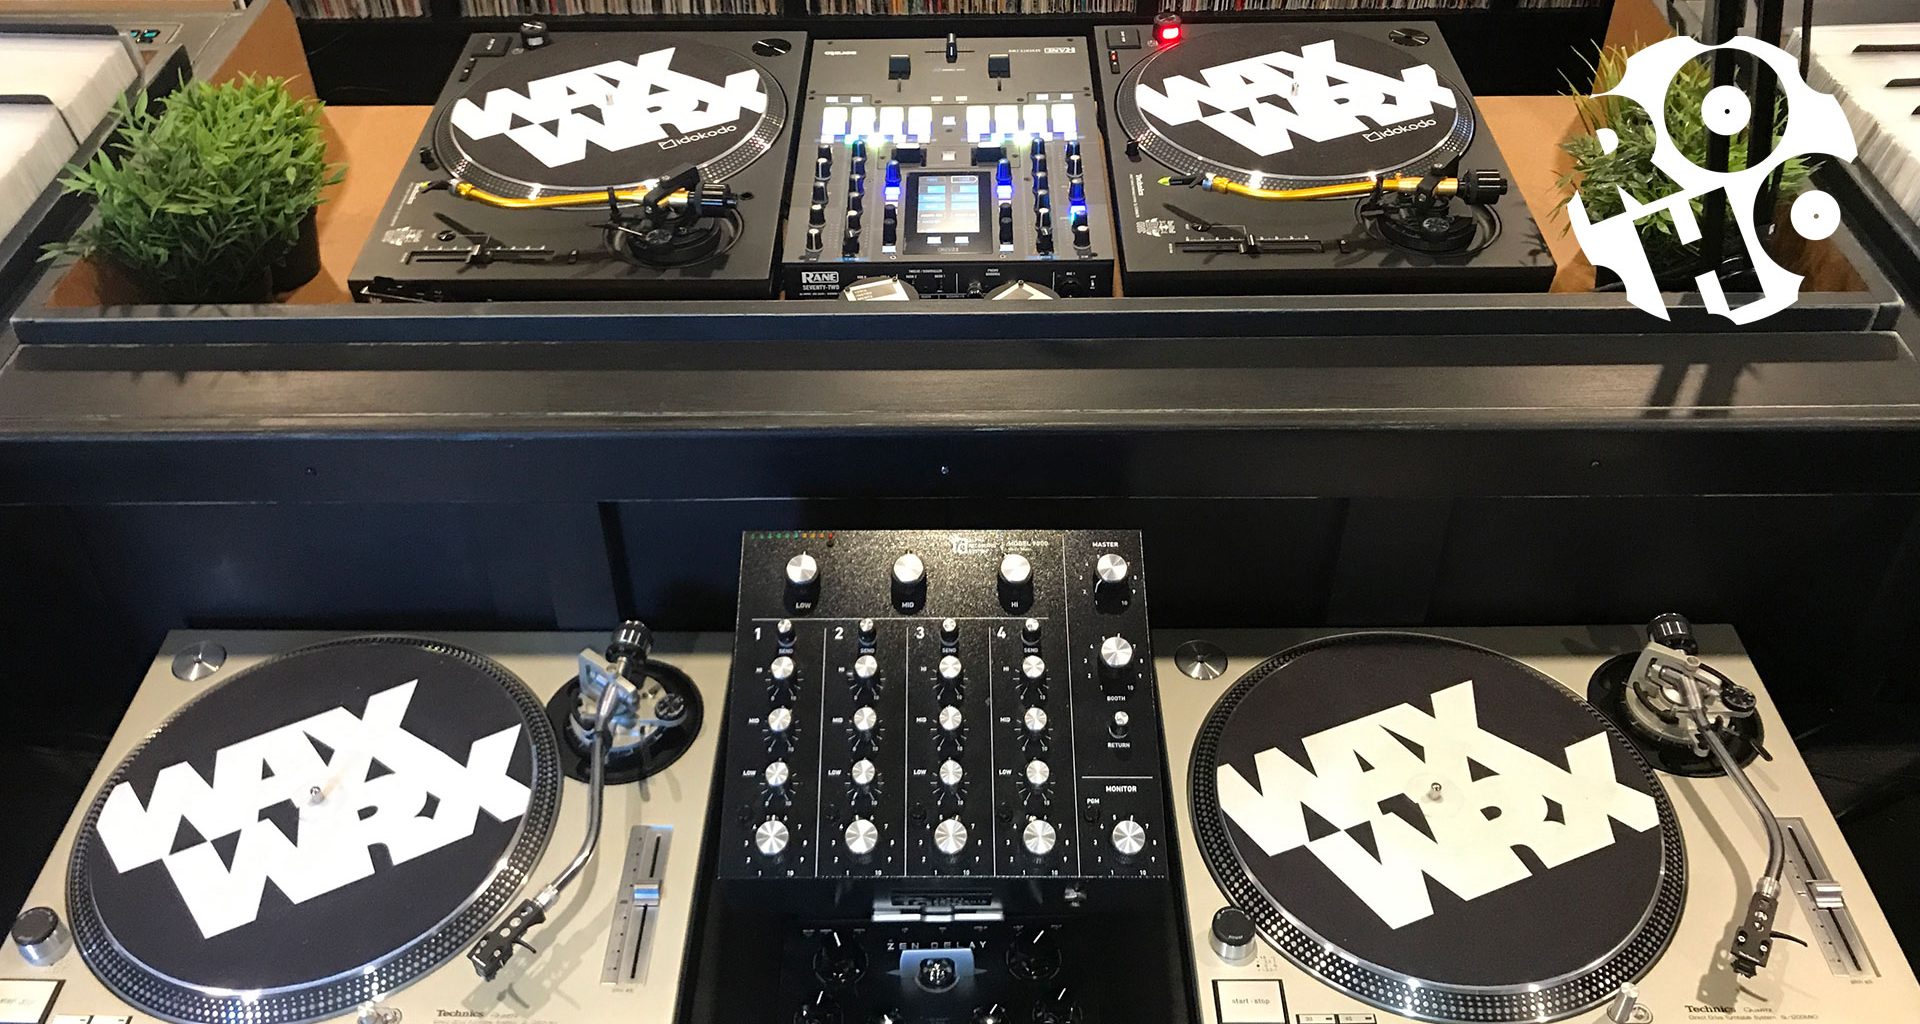 Get the most from your DJ setup